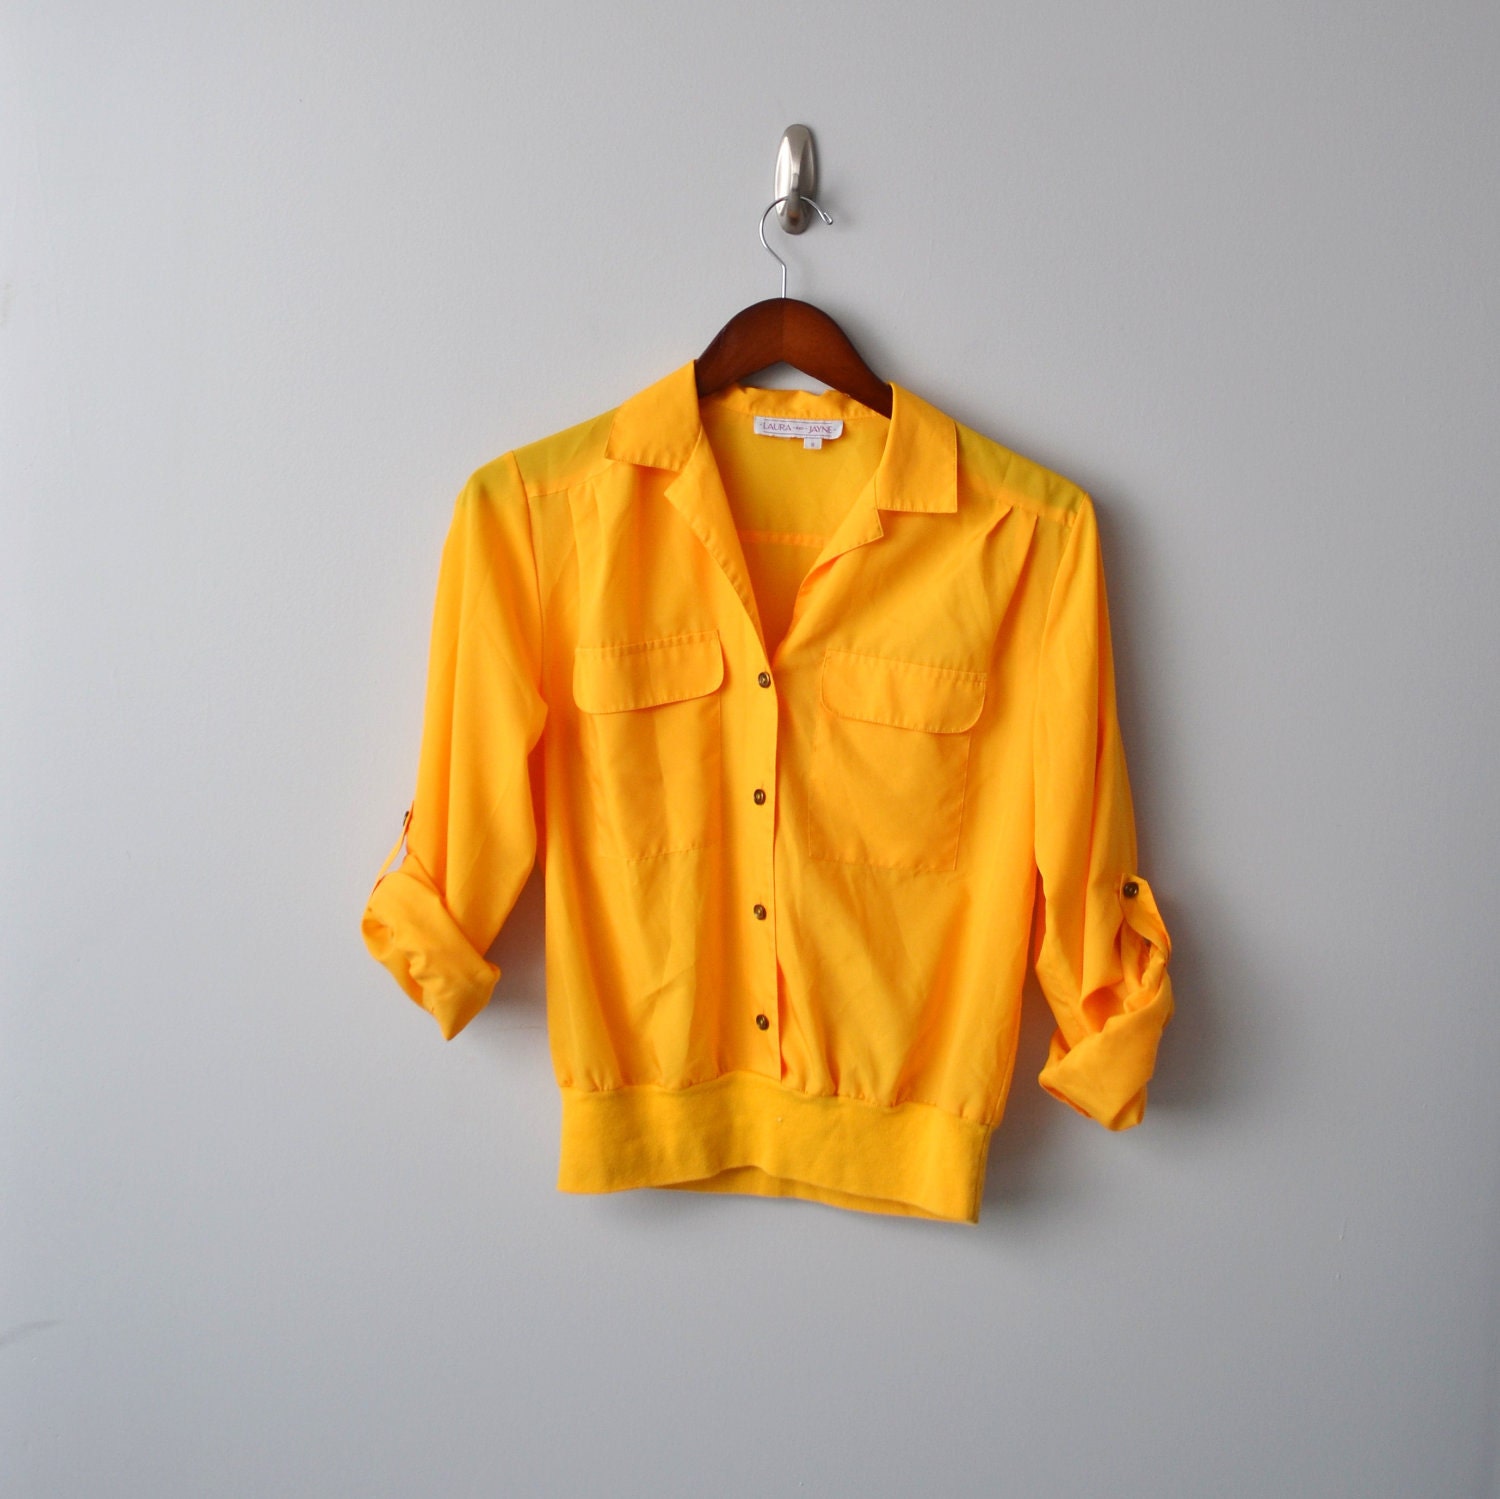 V i n t a g e neon yellow blouse size 6